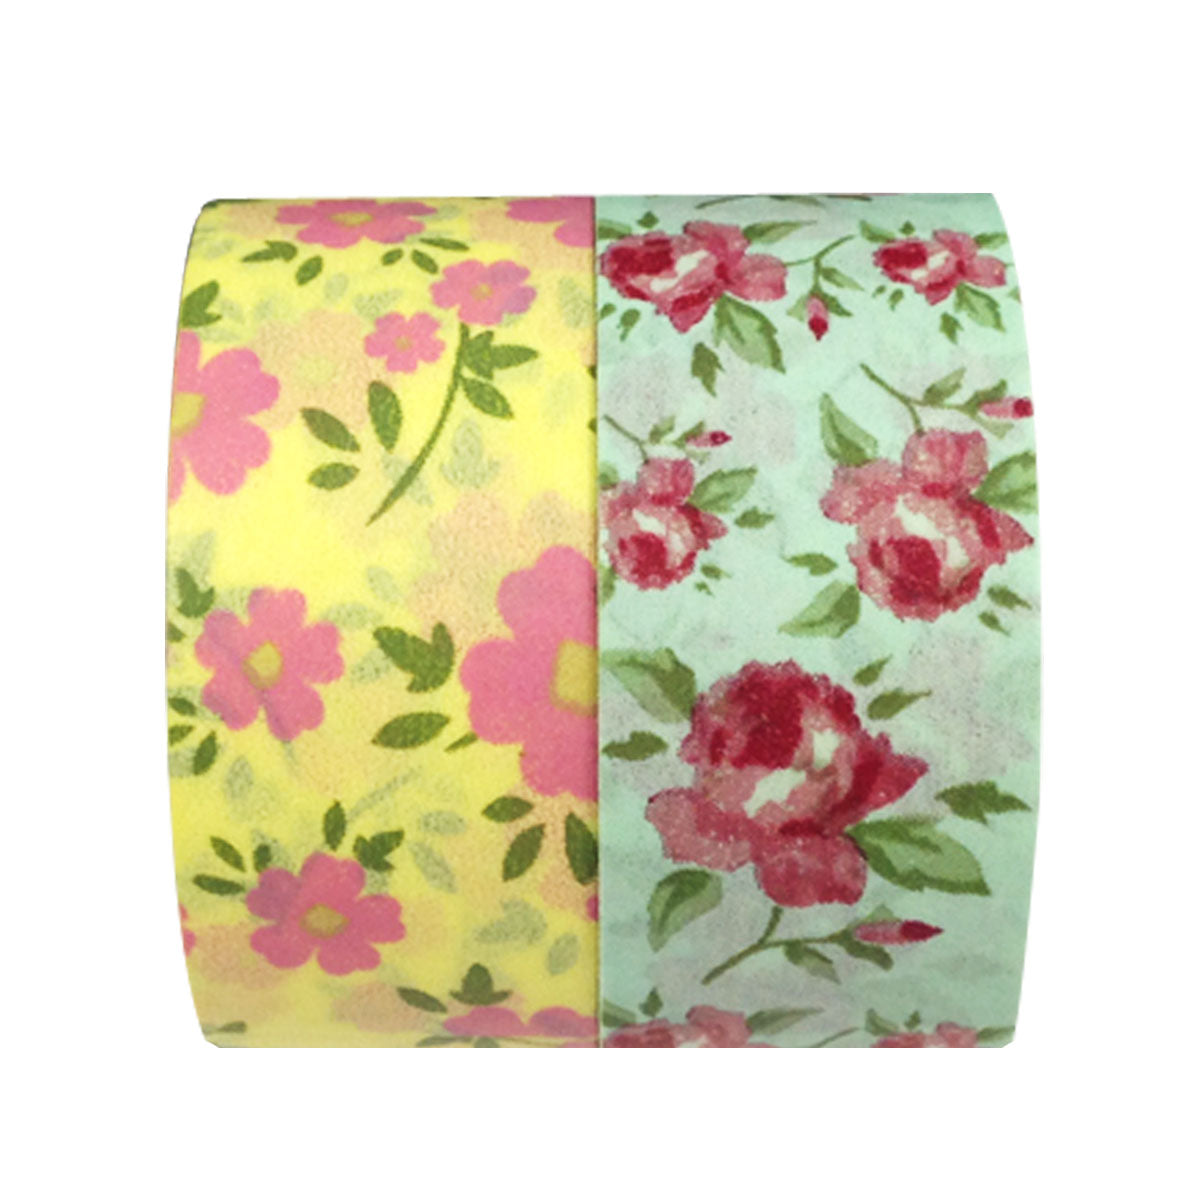 Wrapables Sweet Bouquet Washi Masking Tape (set of 2), 10M L x 20mm W